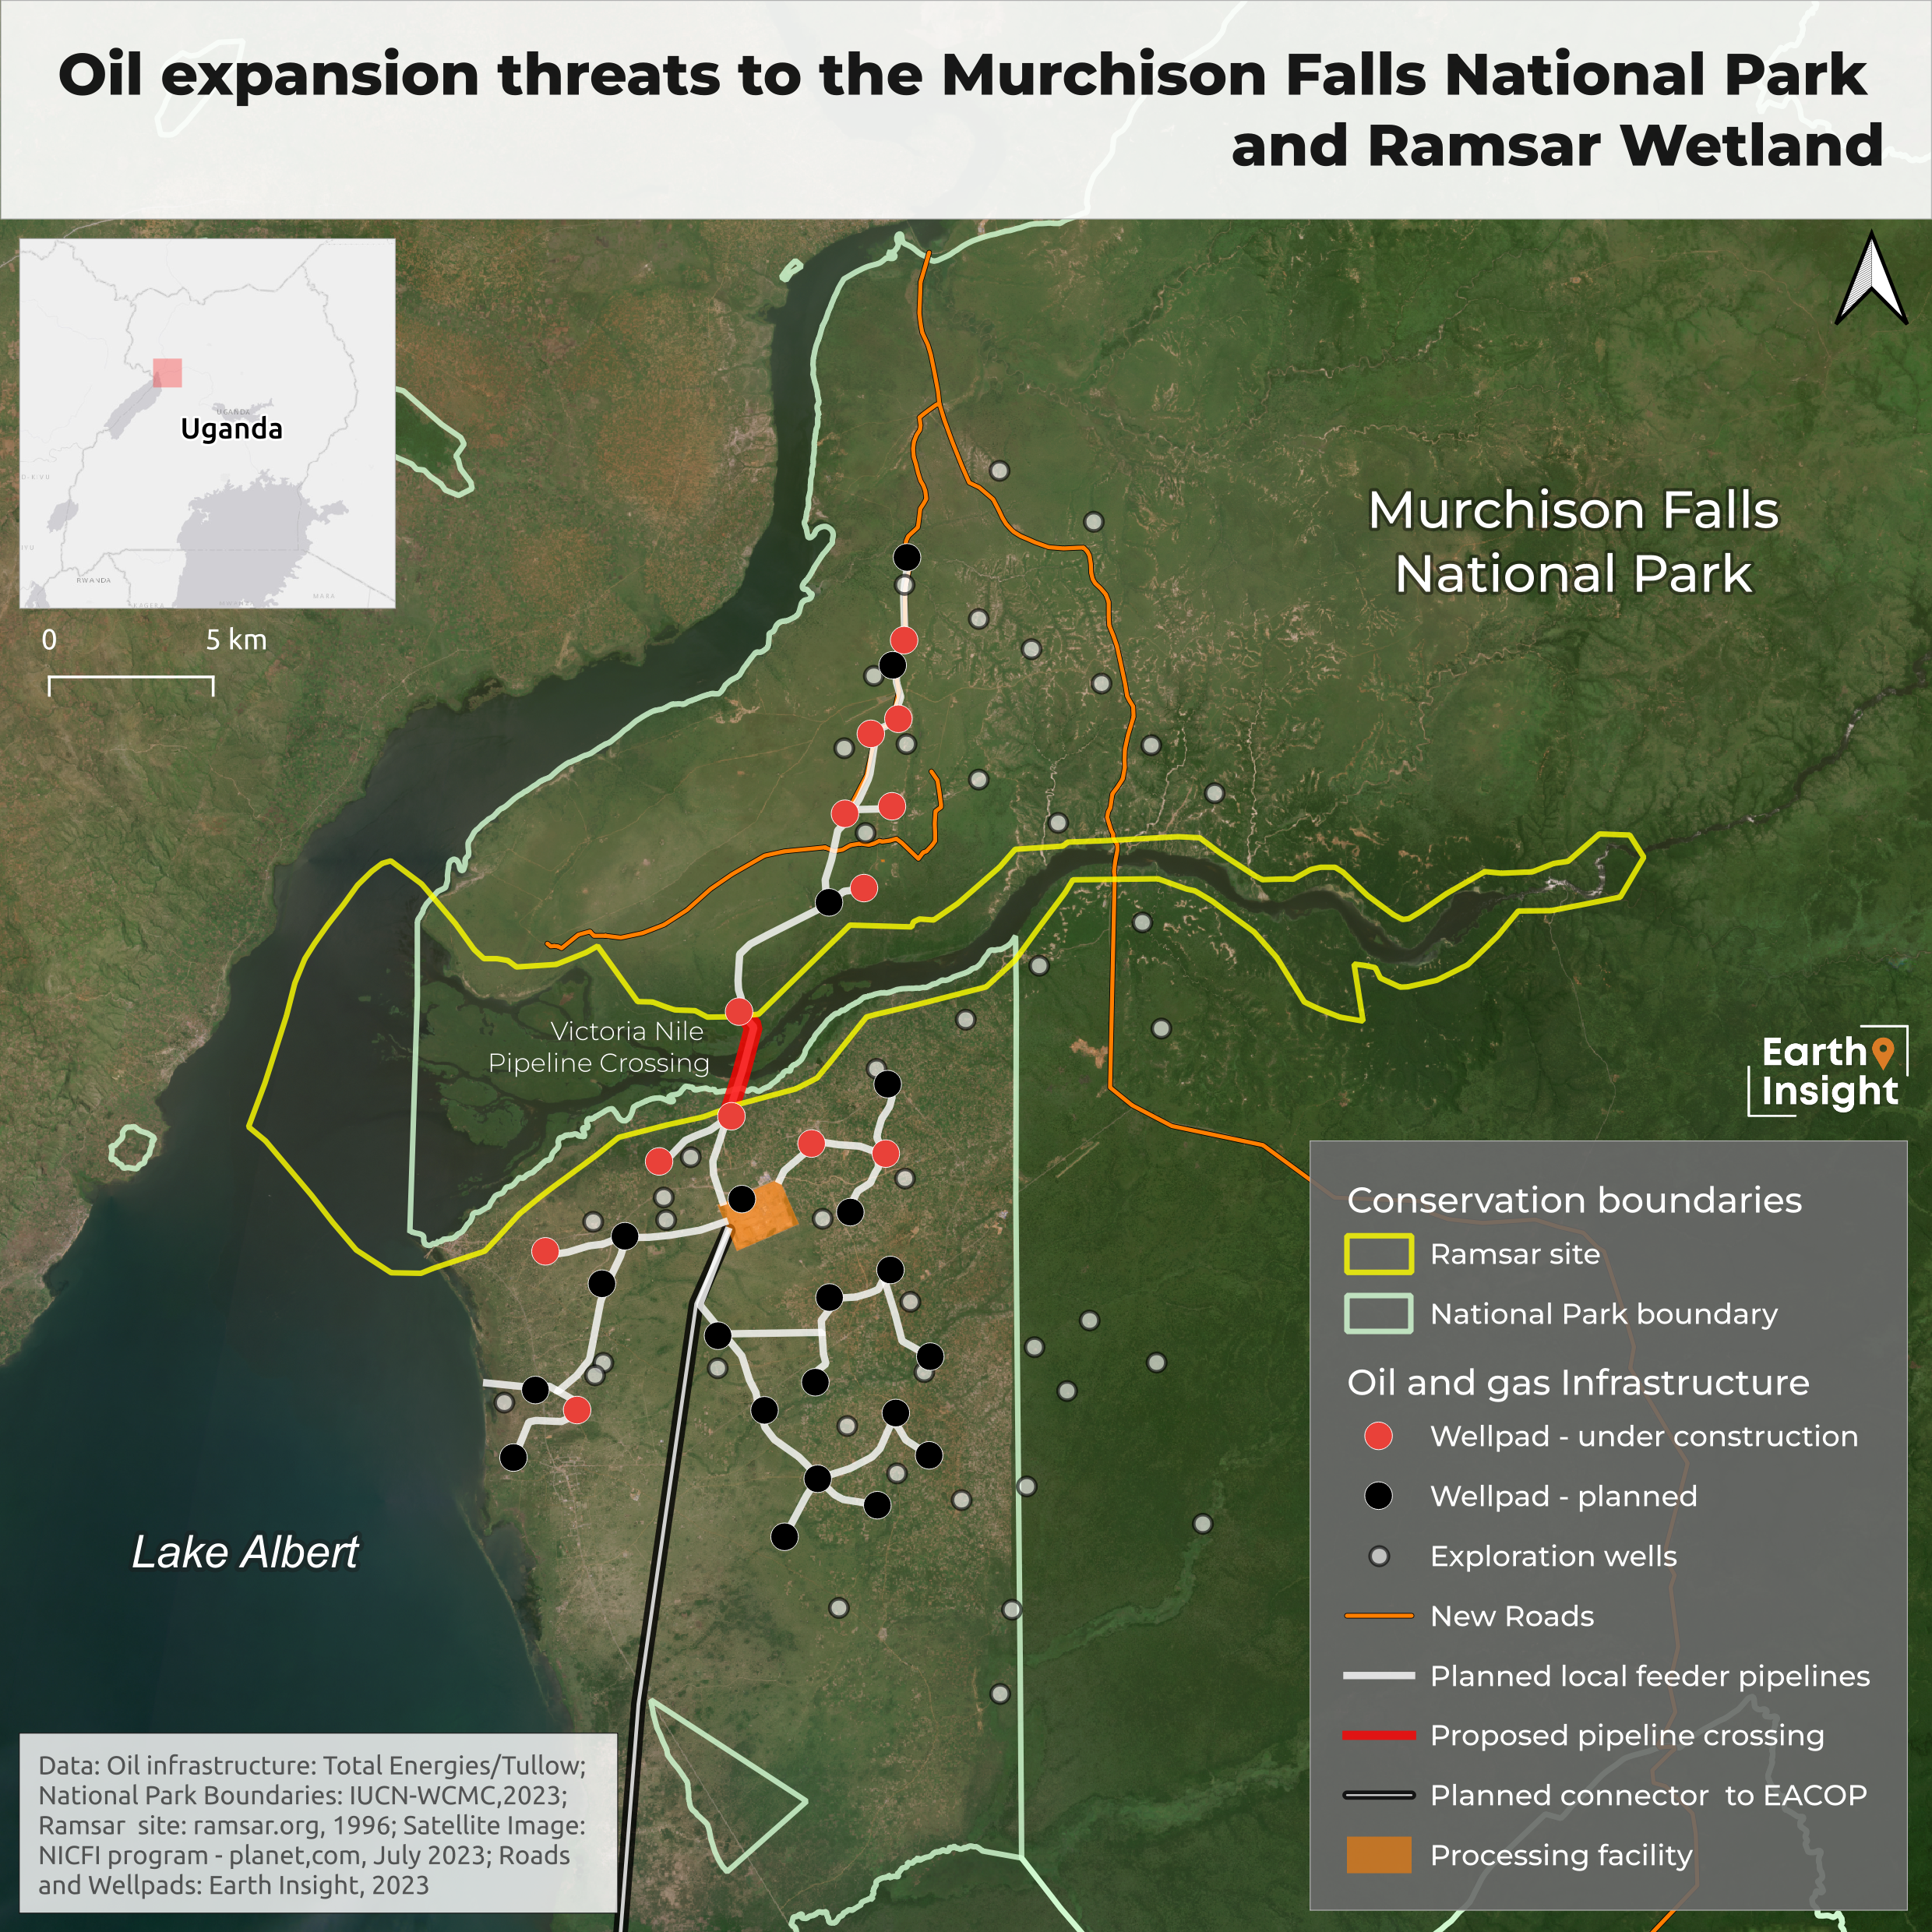 Map showing where fossil extraction and exploration is planned Around the Murchison Falls National Park and Ramsar Wetland.